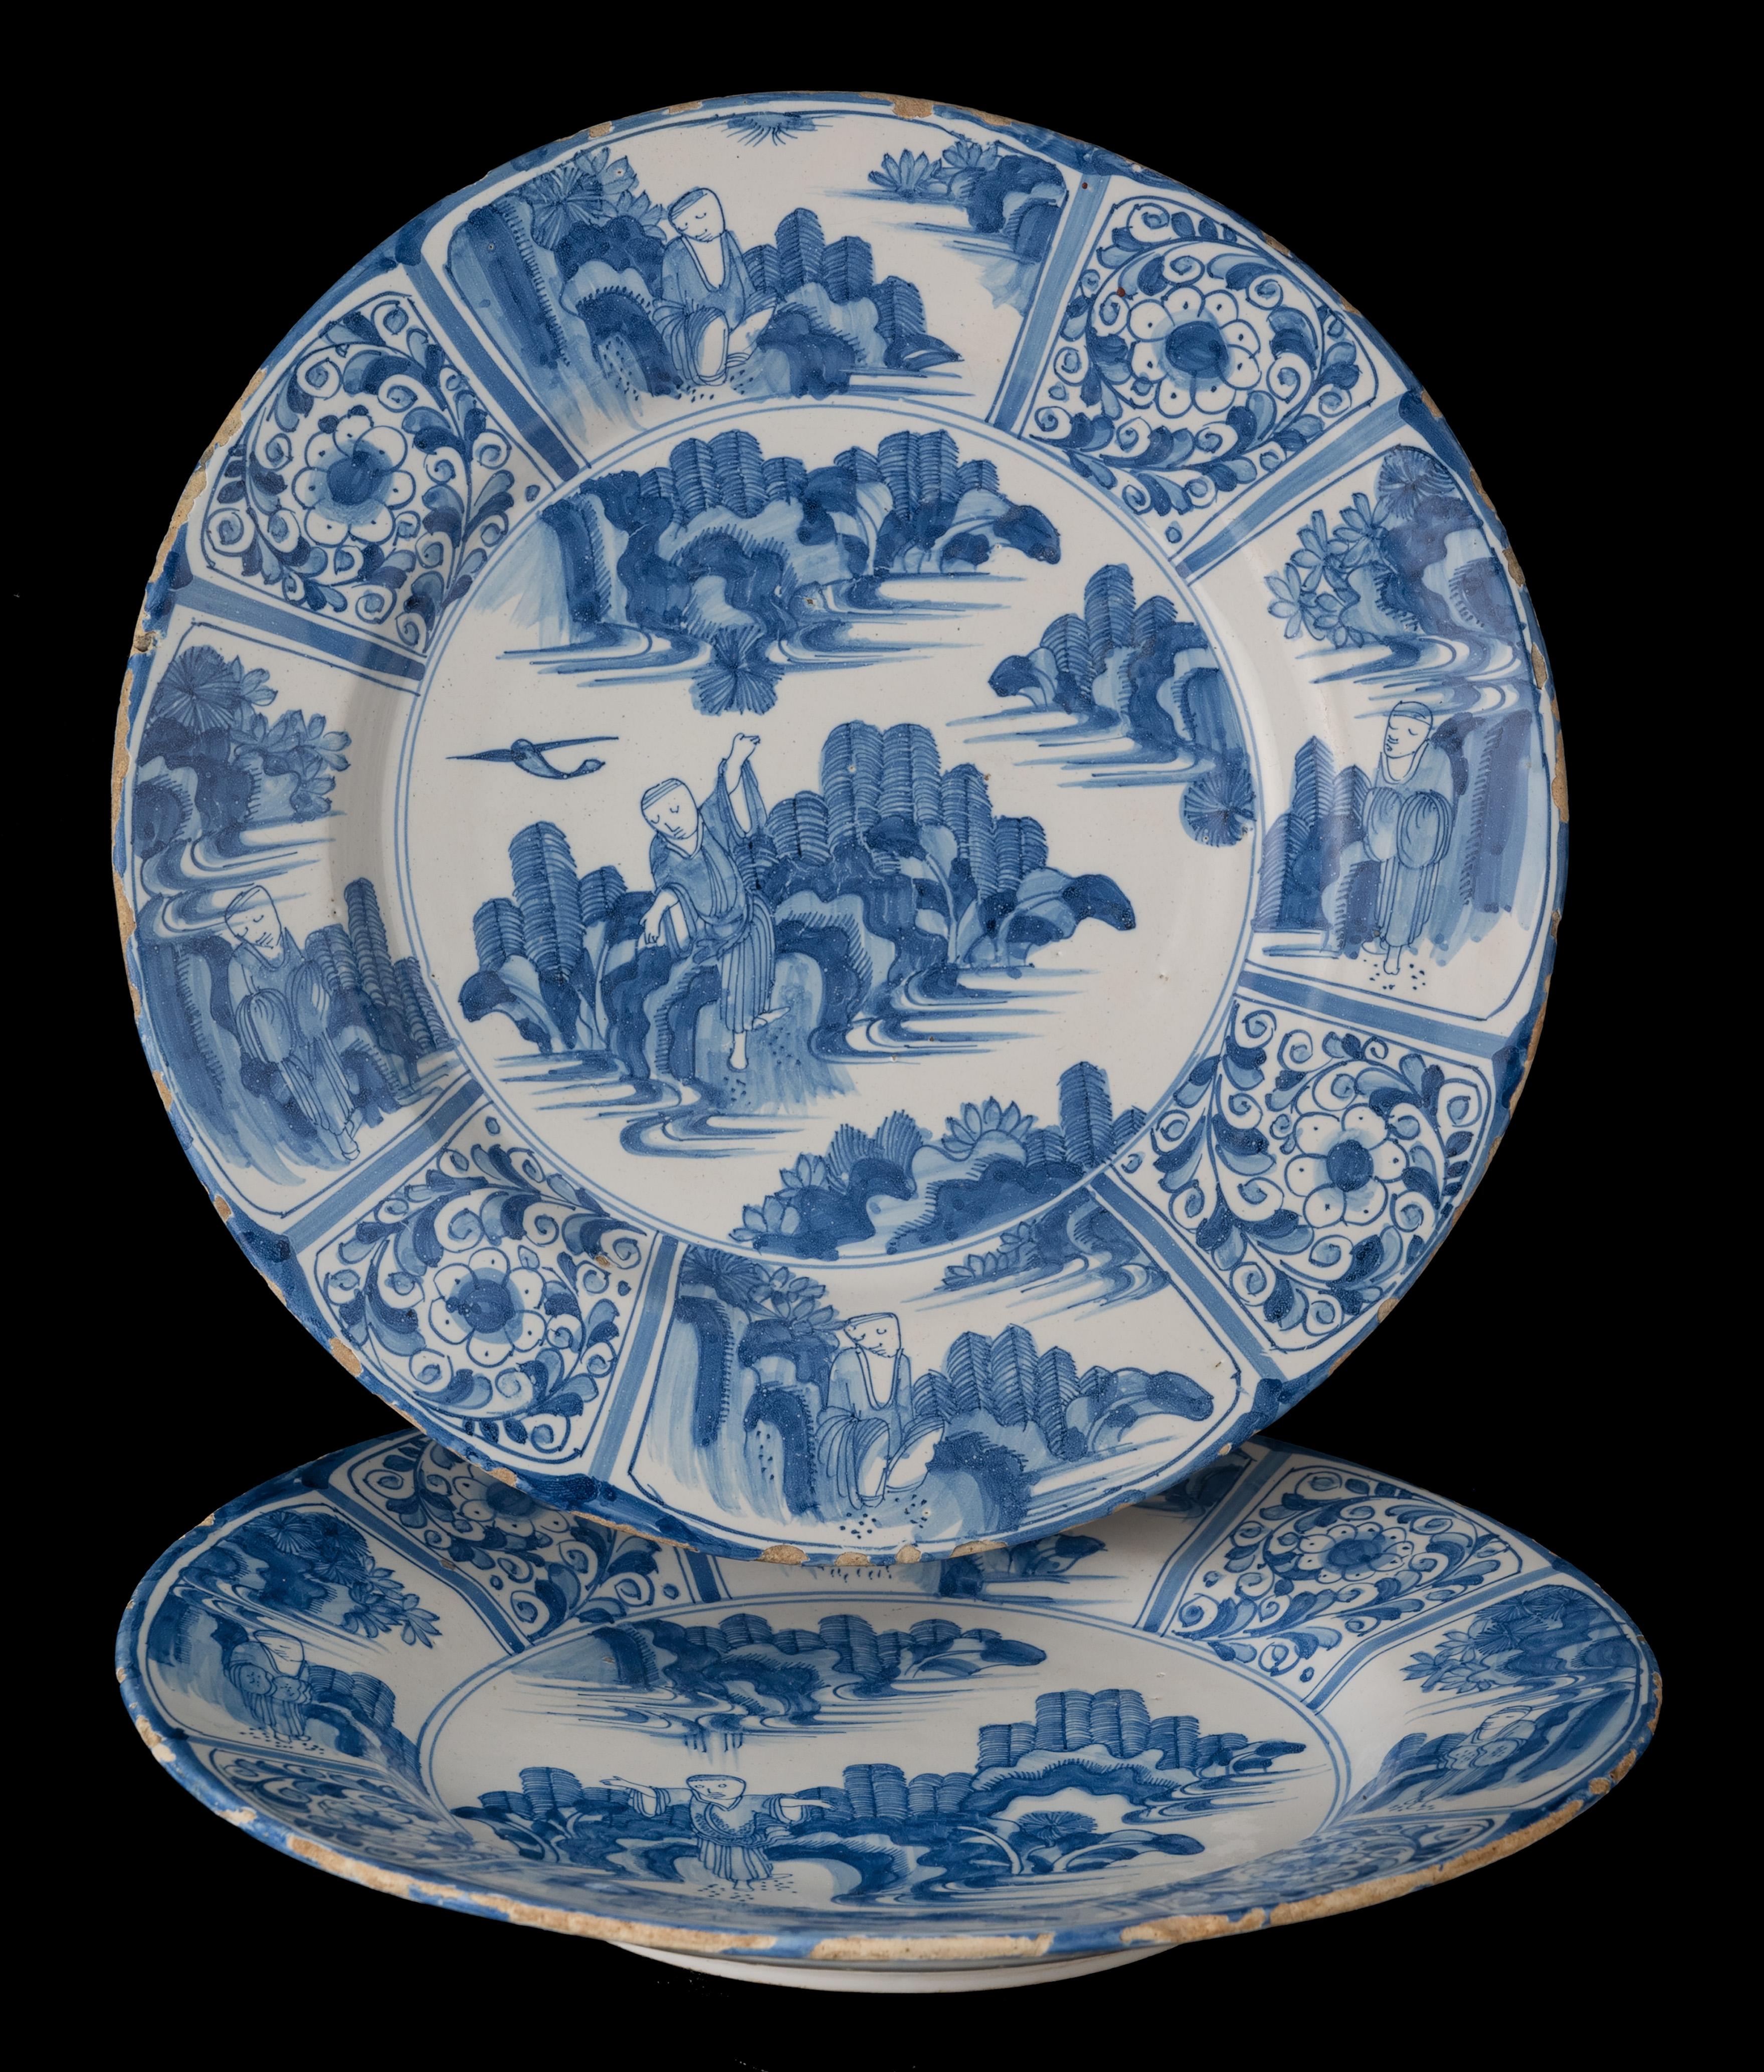 The blue and white dishes have wide-spreading flanges and are painted with a Chinese figure in an oriental landscape. The eight-panelled border is alternately decorated with floral motifs and oriental landscapes. 

The decoration is inspired by